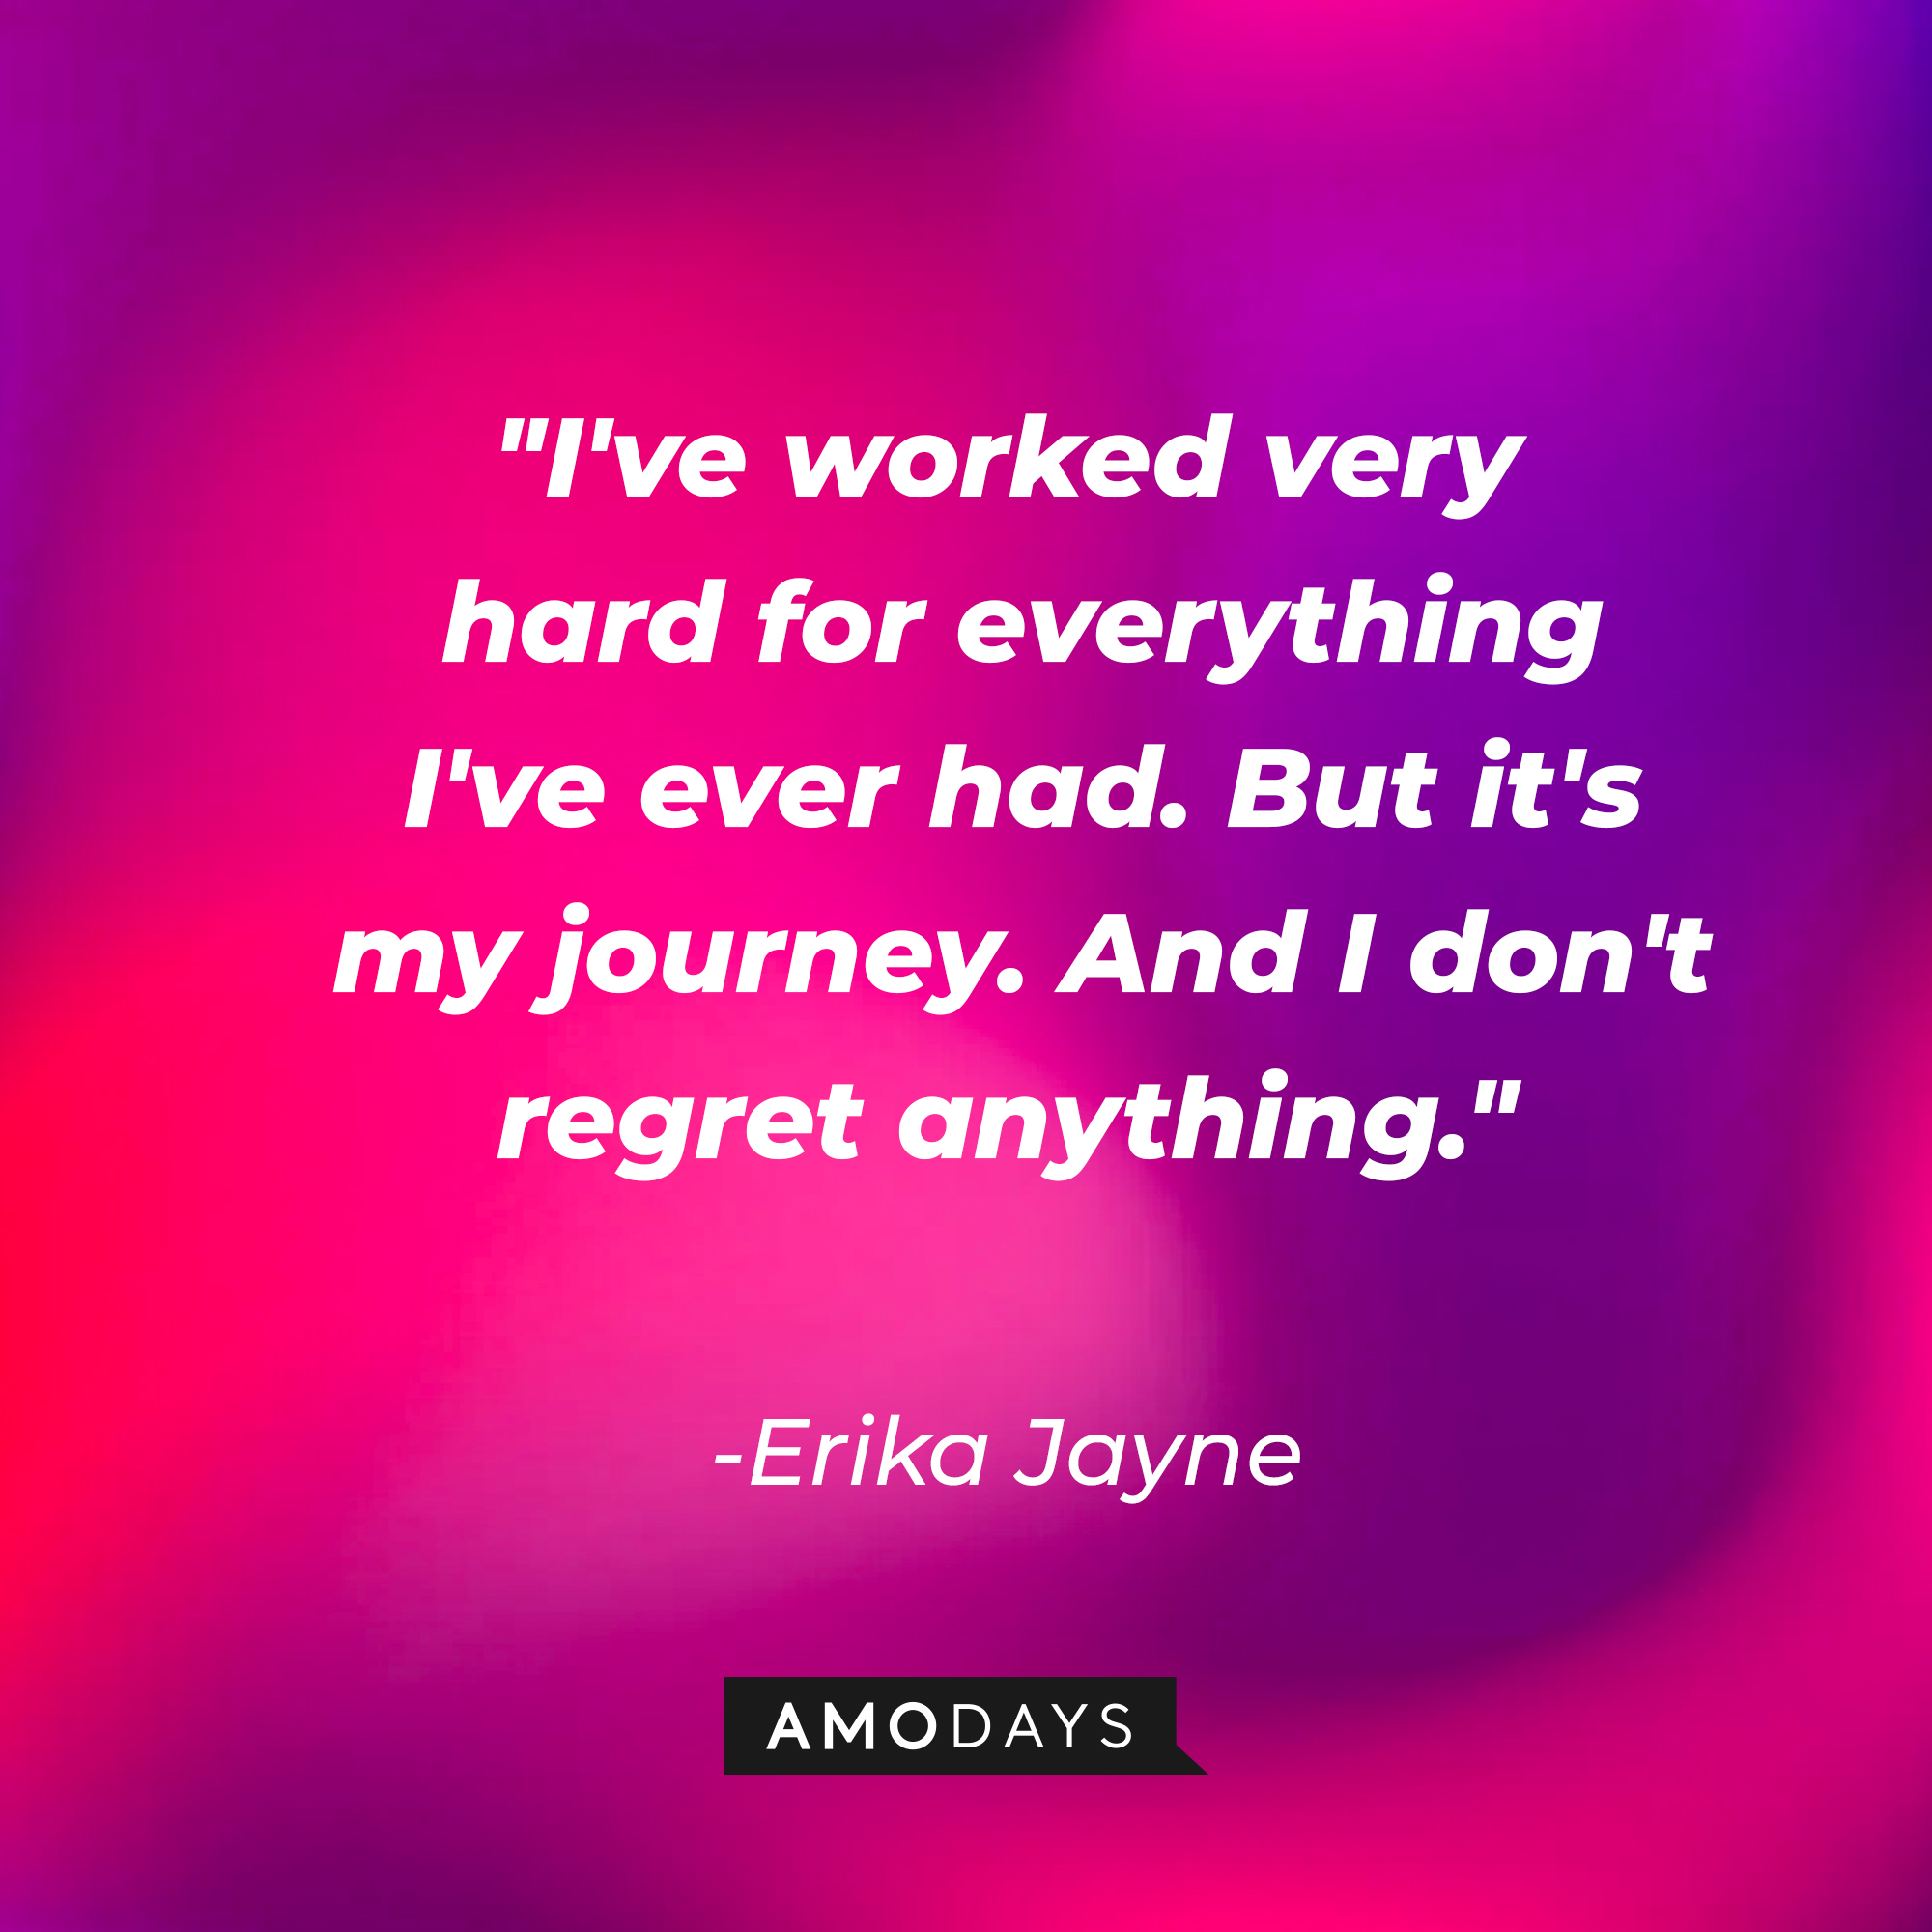 Erika Jayne’s quote: "I've worked very hard for everything I've ever had. But it's my journey. And I don't regret anything." | Image: Amodays